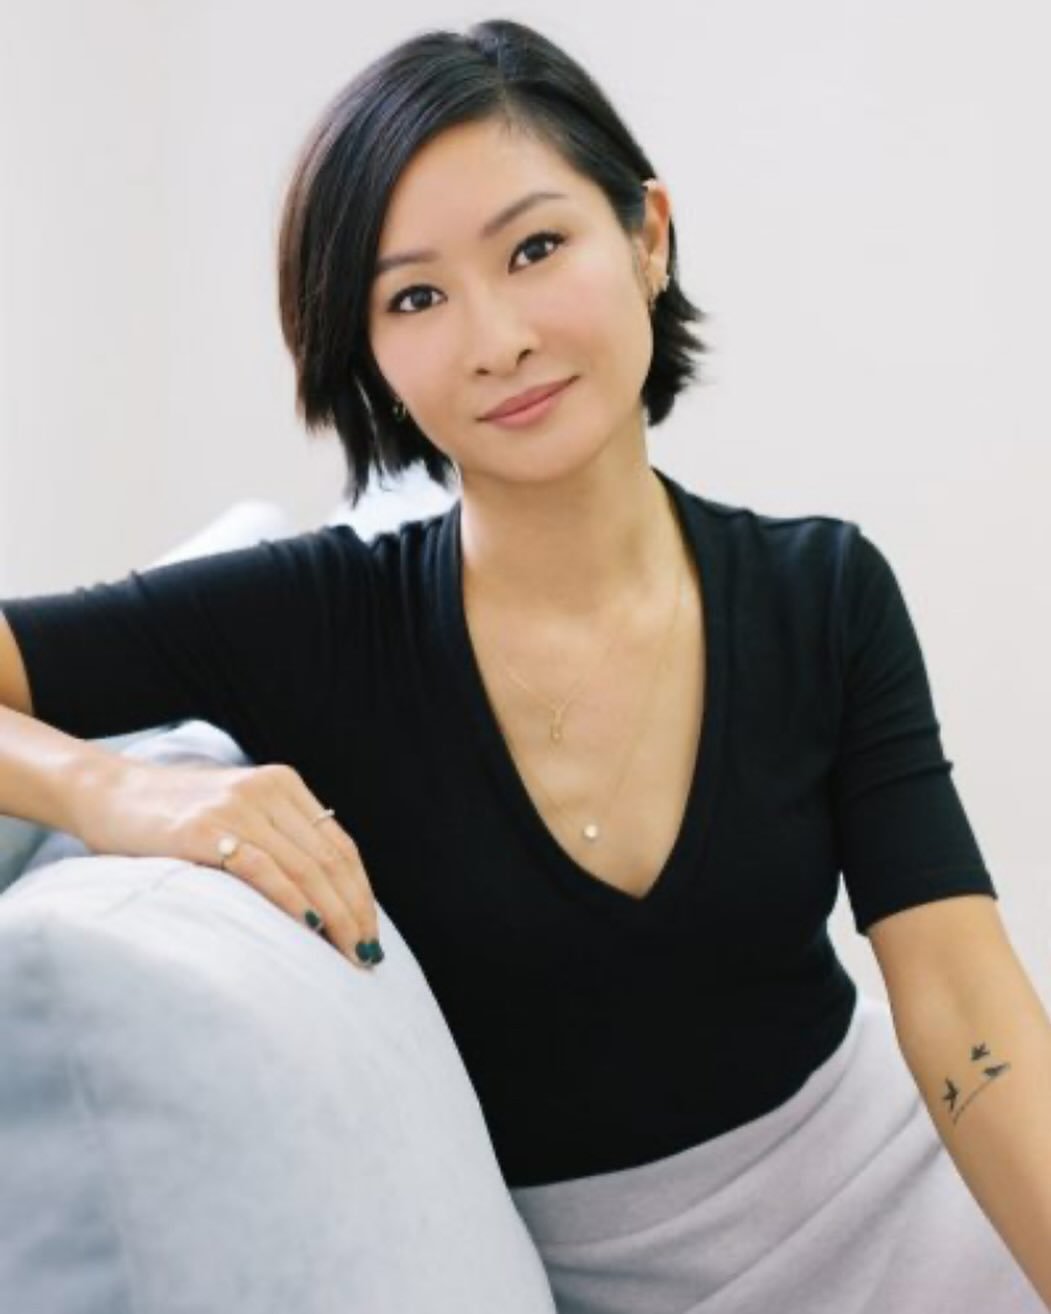 We are so excited to welcome Jennie Kwon of @jenniekwondesigns to our shop this weekend for an extra special fine jewelry trunk show. Before Jennie started her jewelry business, she was first a classically trained musician and then an attorney. While